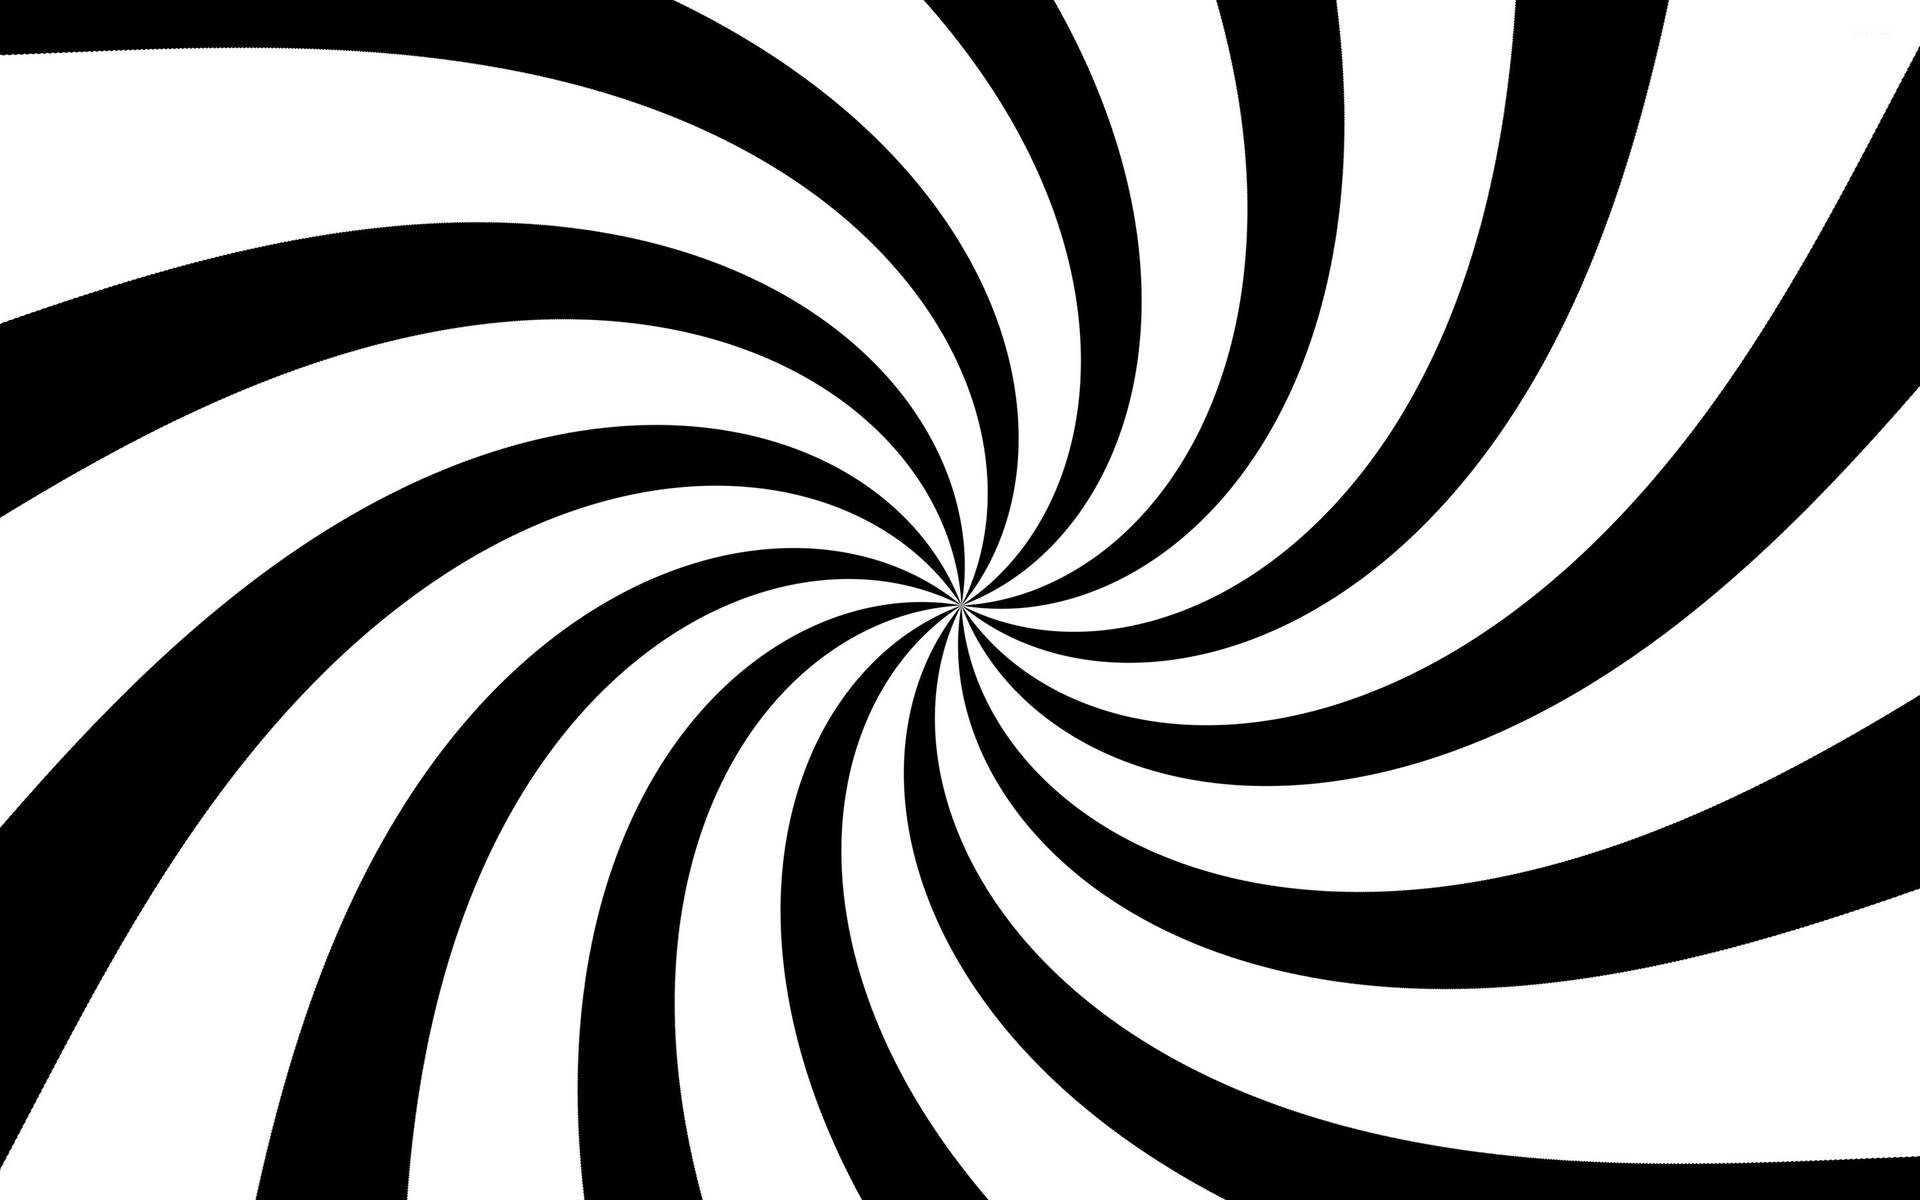 Download Black And White Spiral Pattern Wallpaper | Wallpapers.com